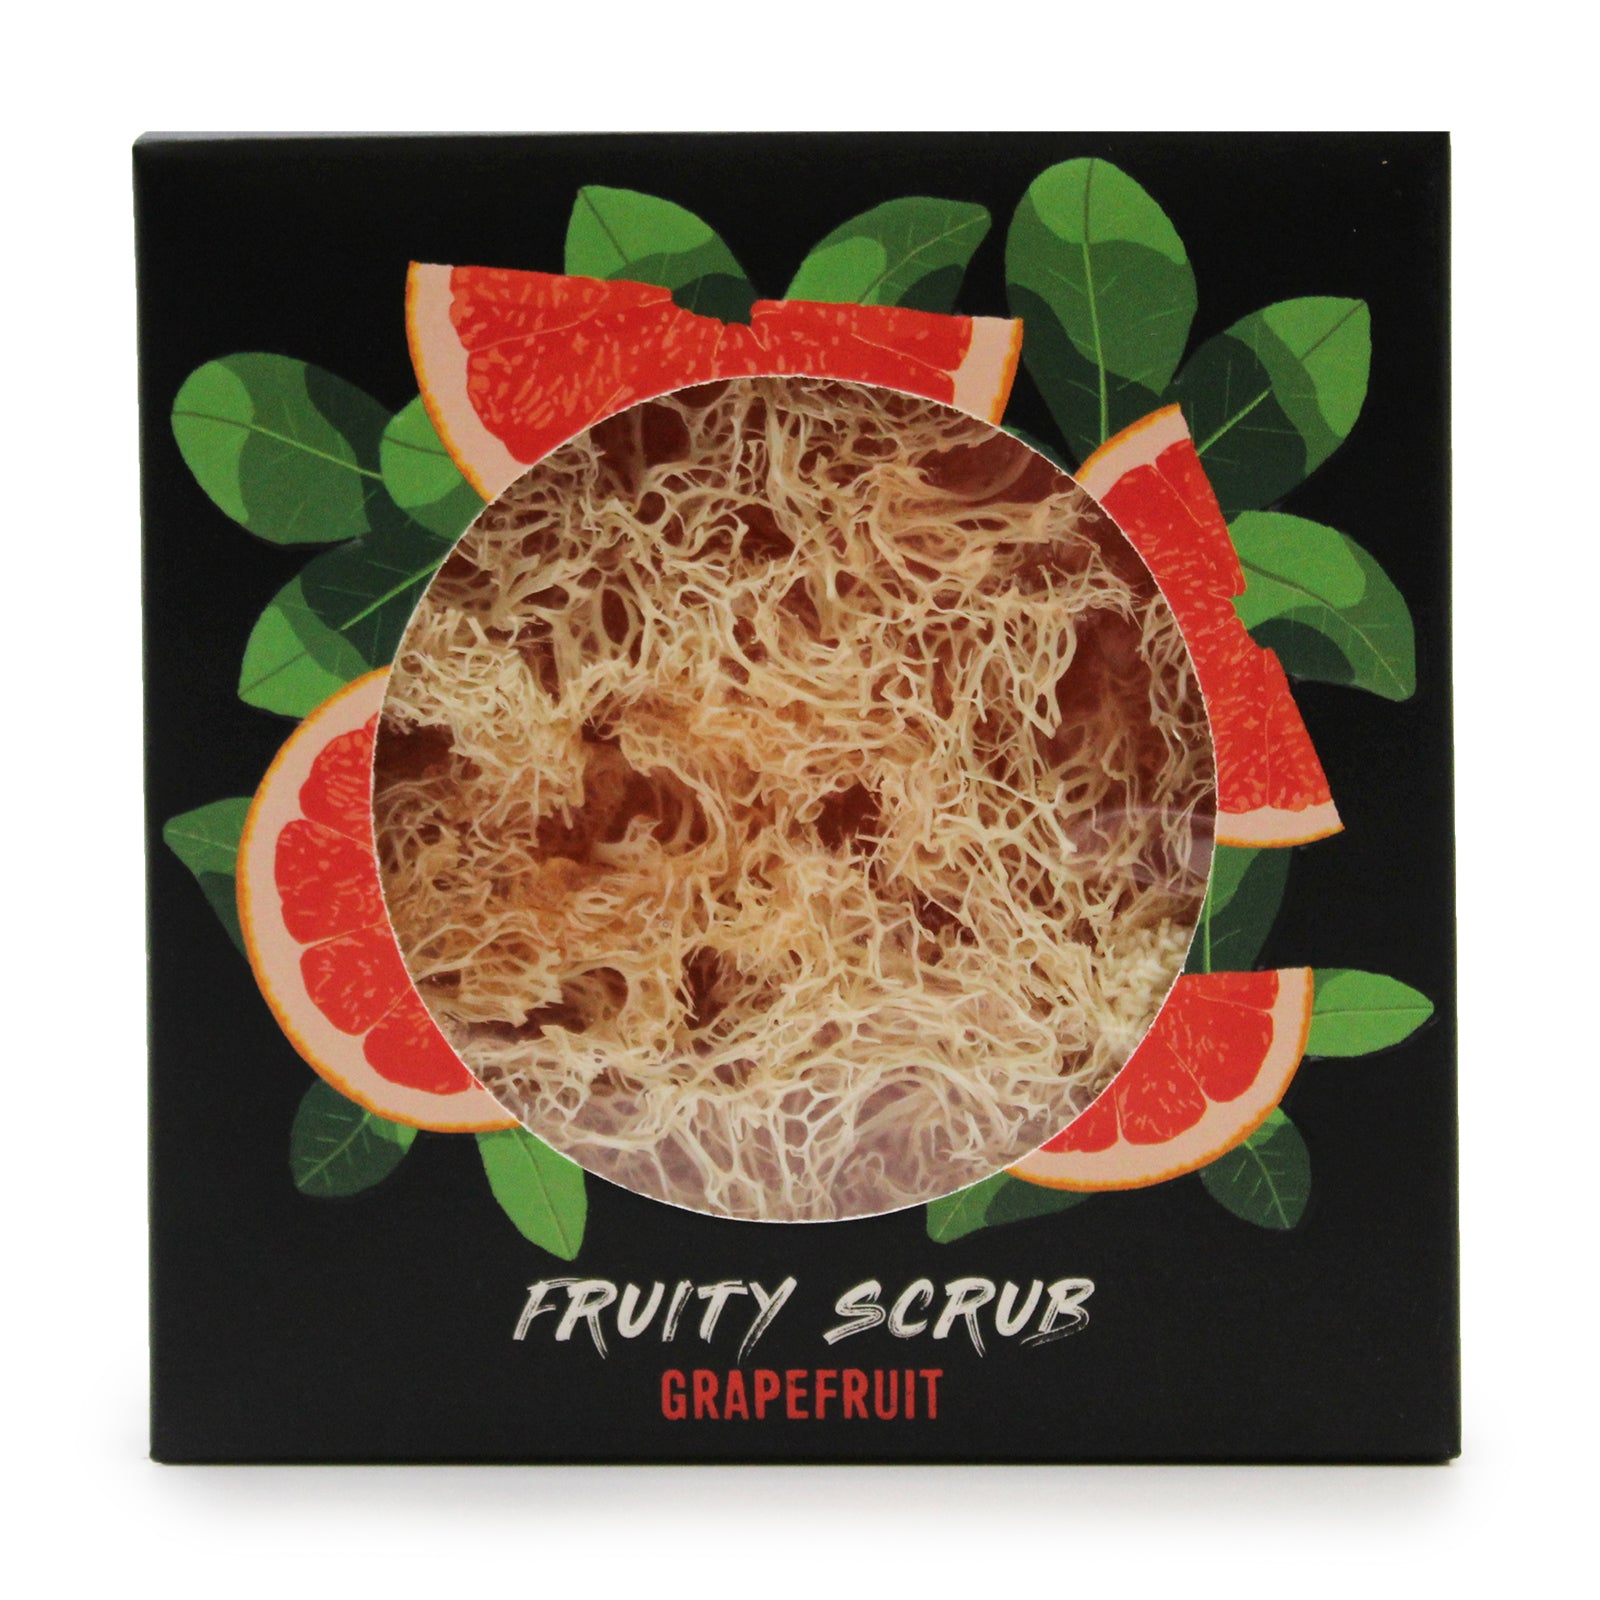 View Fruity Scrub Soap on a Rope Grapefruit information